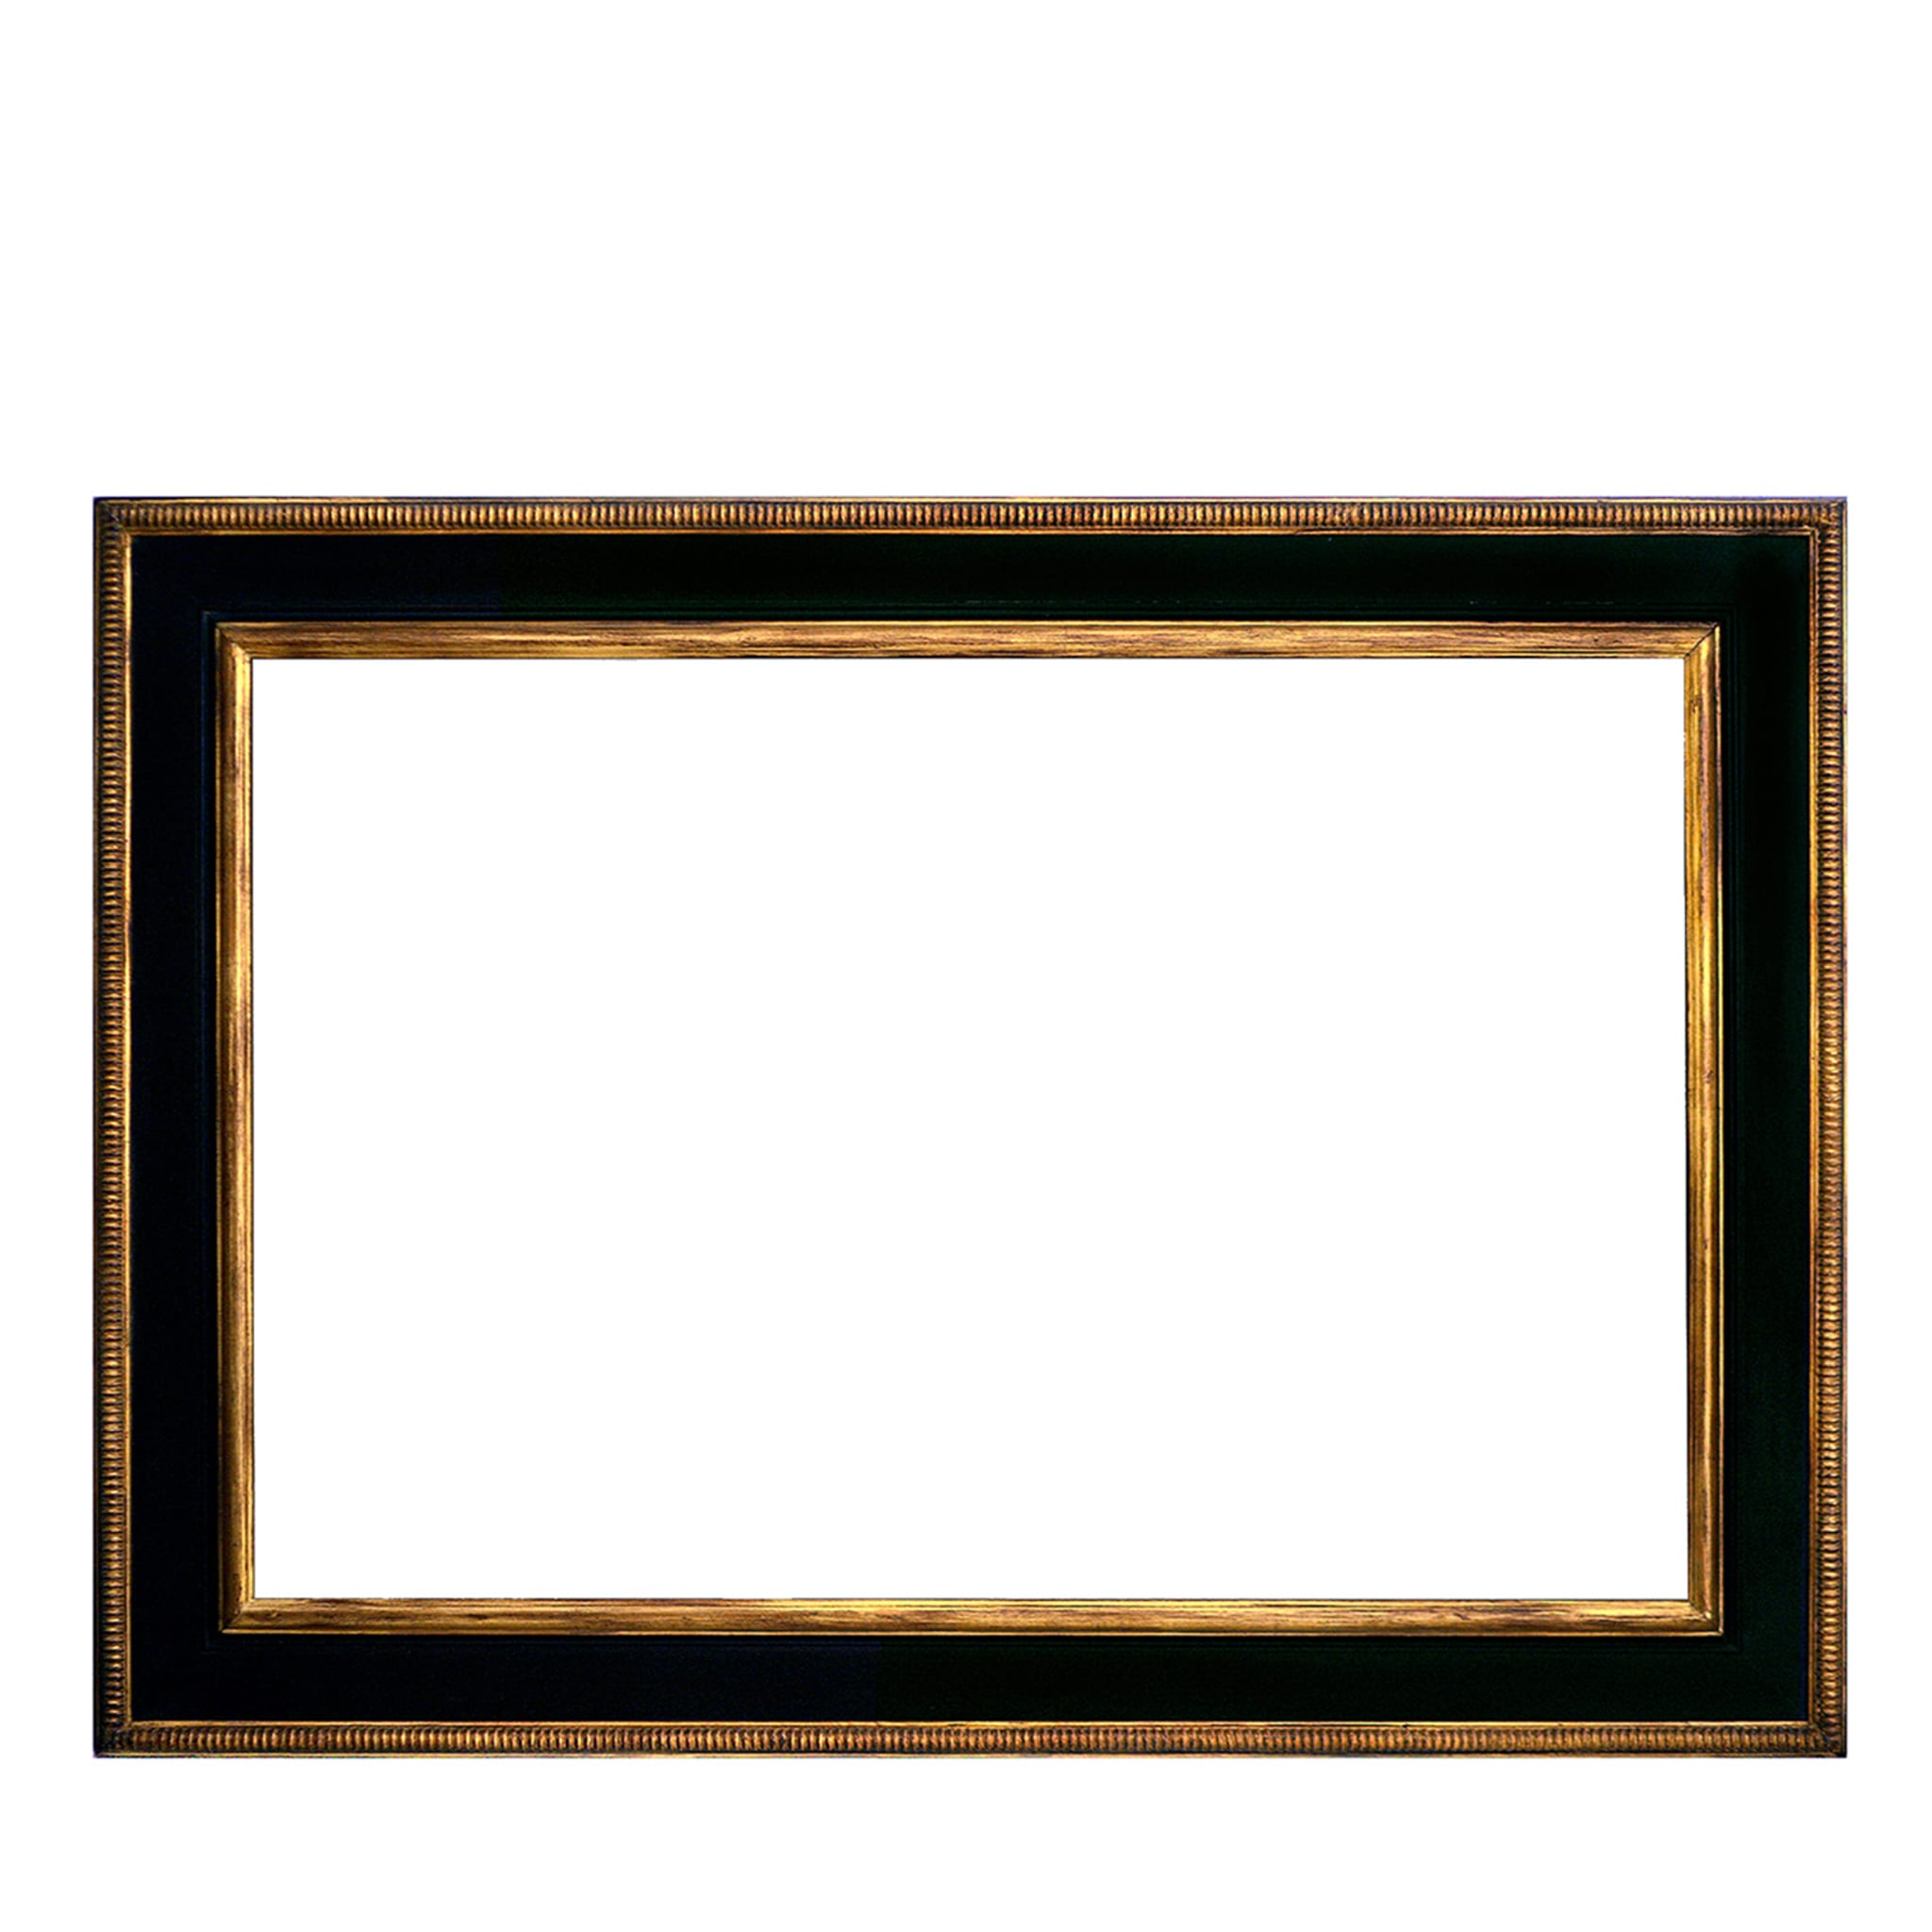 Cassetta Gold Leaf Gilded Ebony Lacquered Wooden Frame  - Main view